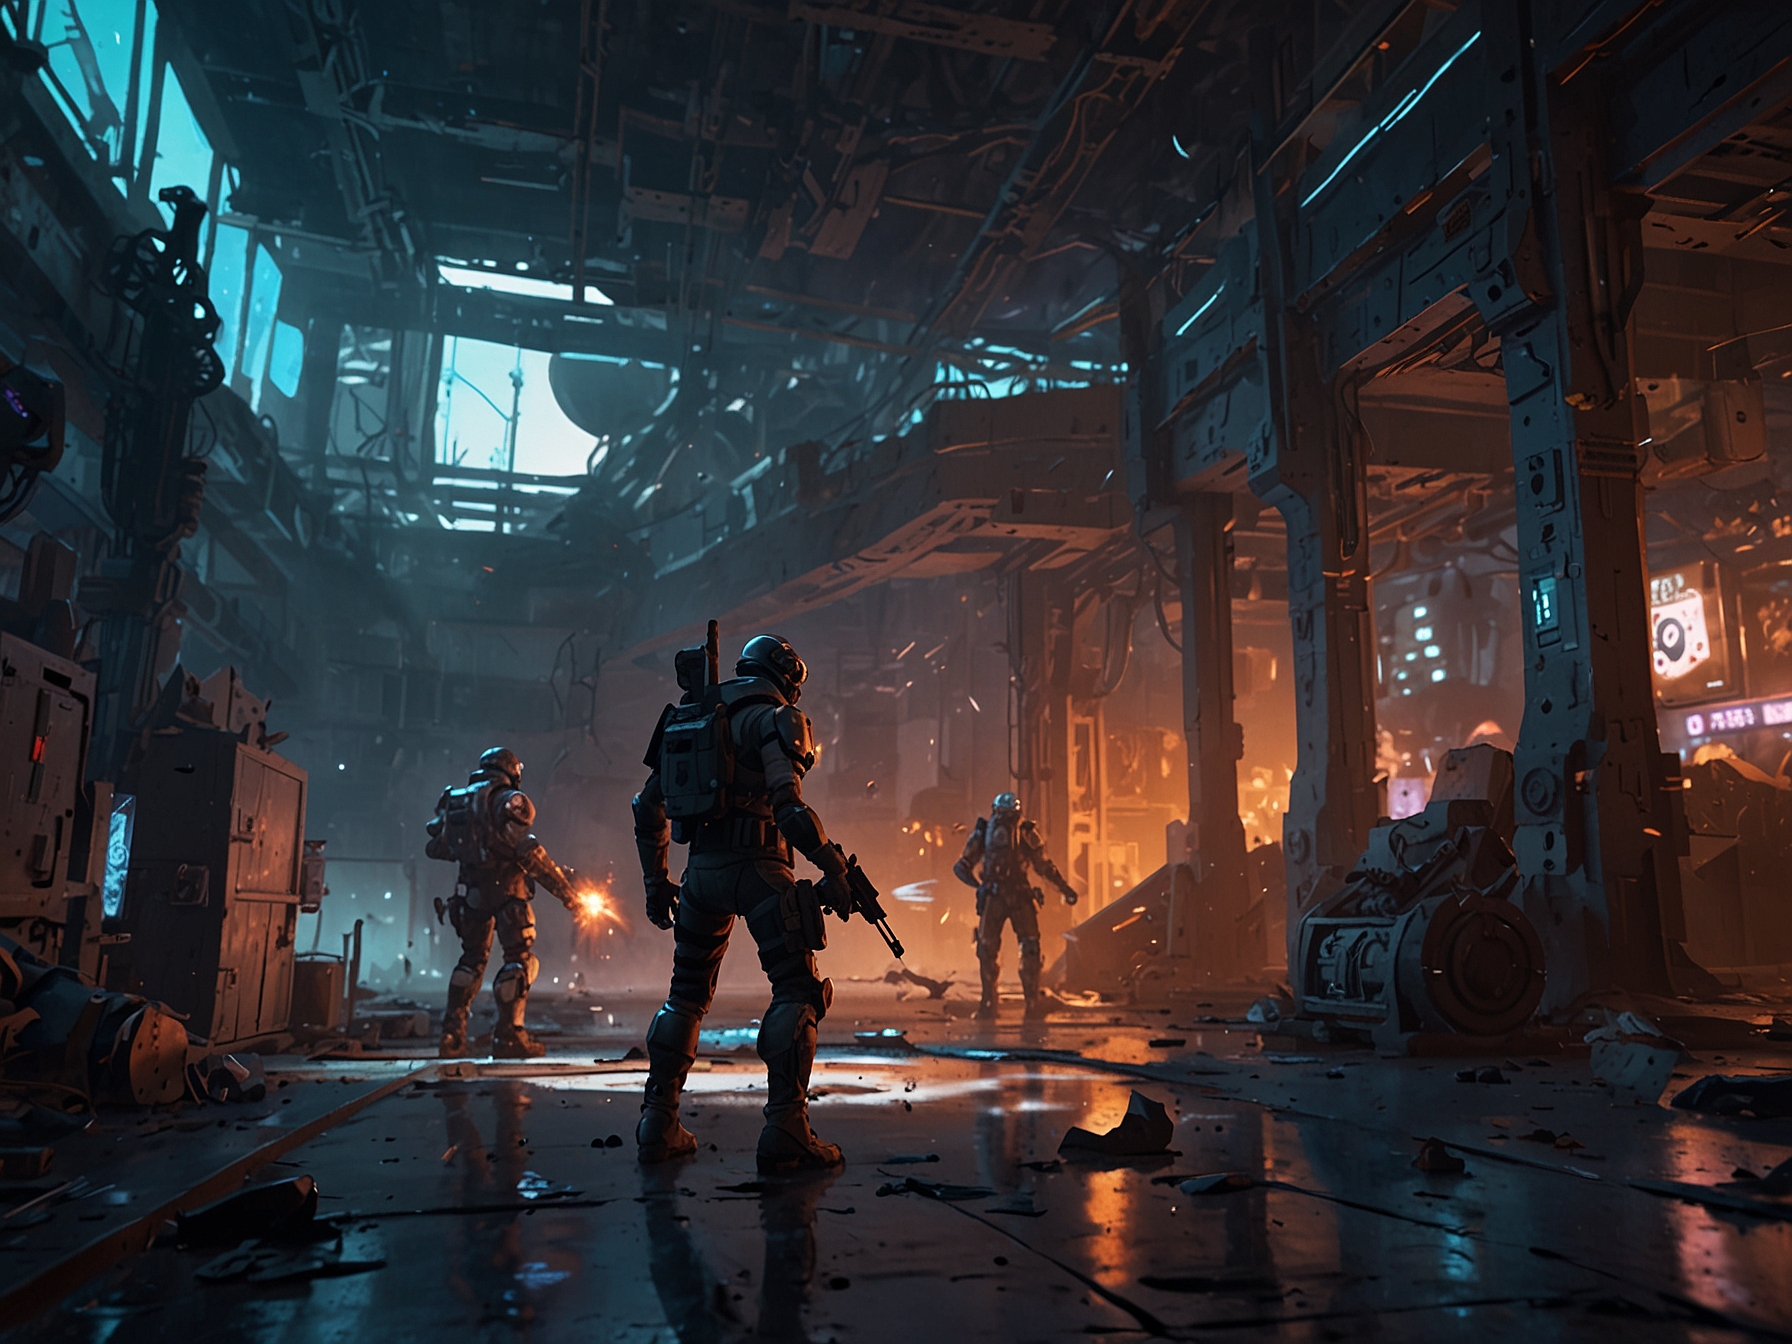 An in-game scene from Zenless Zone Zero showing characters in action, highlighting innovative gameplay mechanics and intricate world-building elements that enhance the immersive experience.